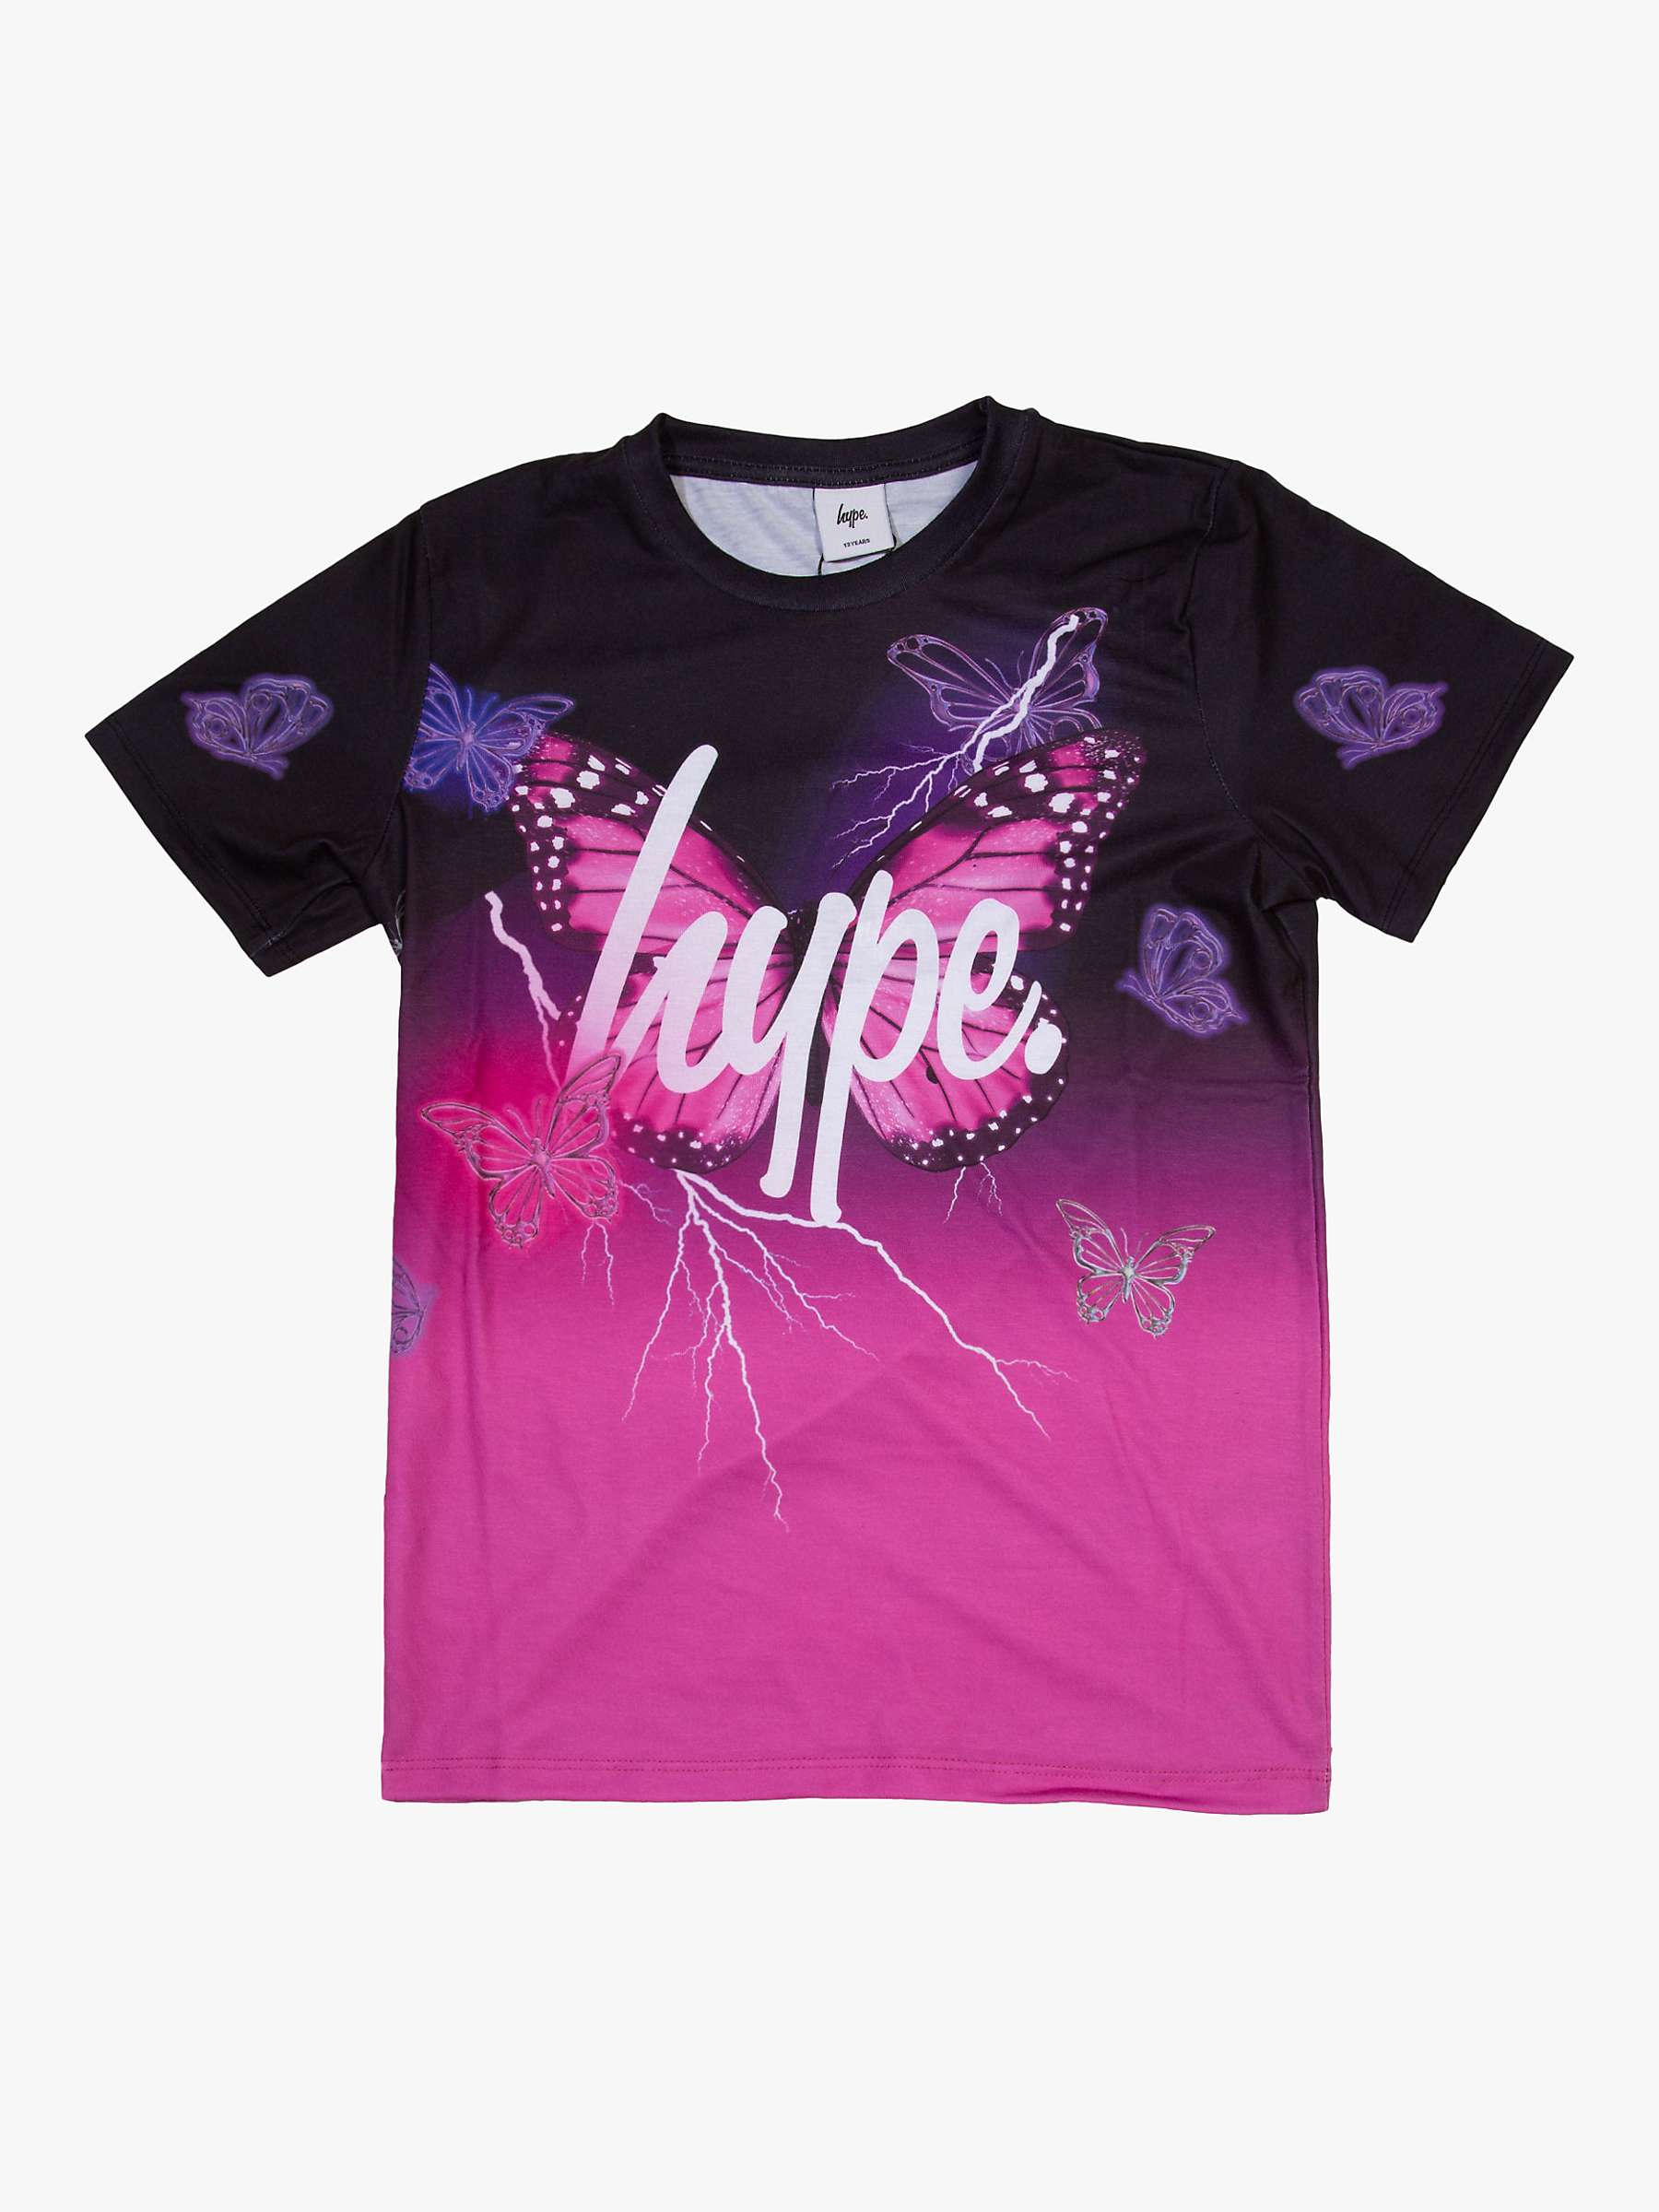 Buy Hype Kids' Fade Butterfly T-Shirt, Black/Multi Online at johnlewis.com